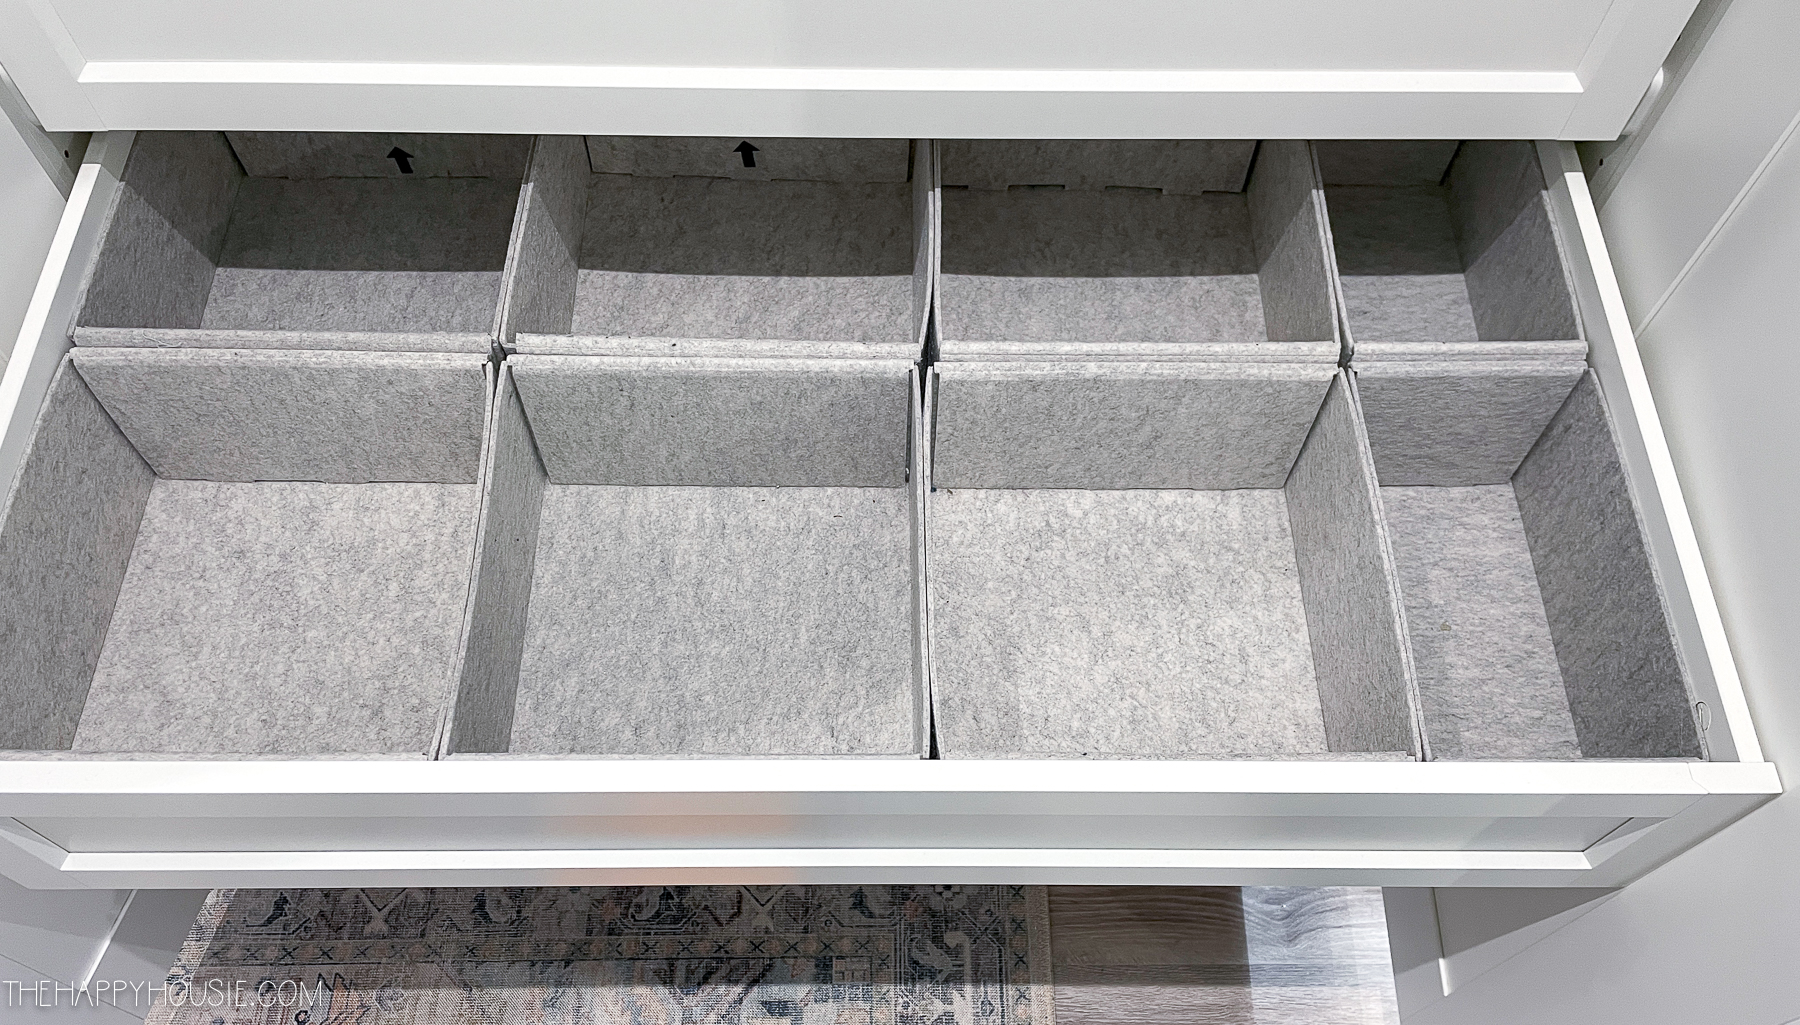 felt drawer dividers in an Ikea Pax system drawer for bedroom organization ideas